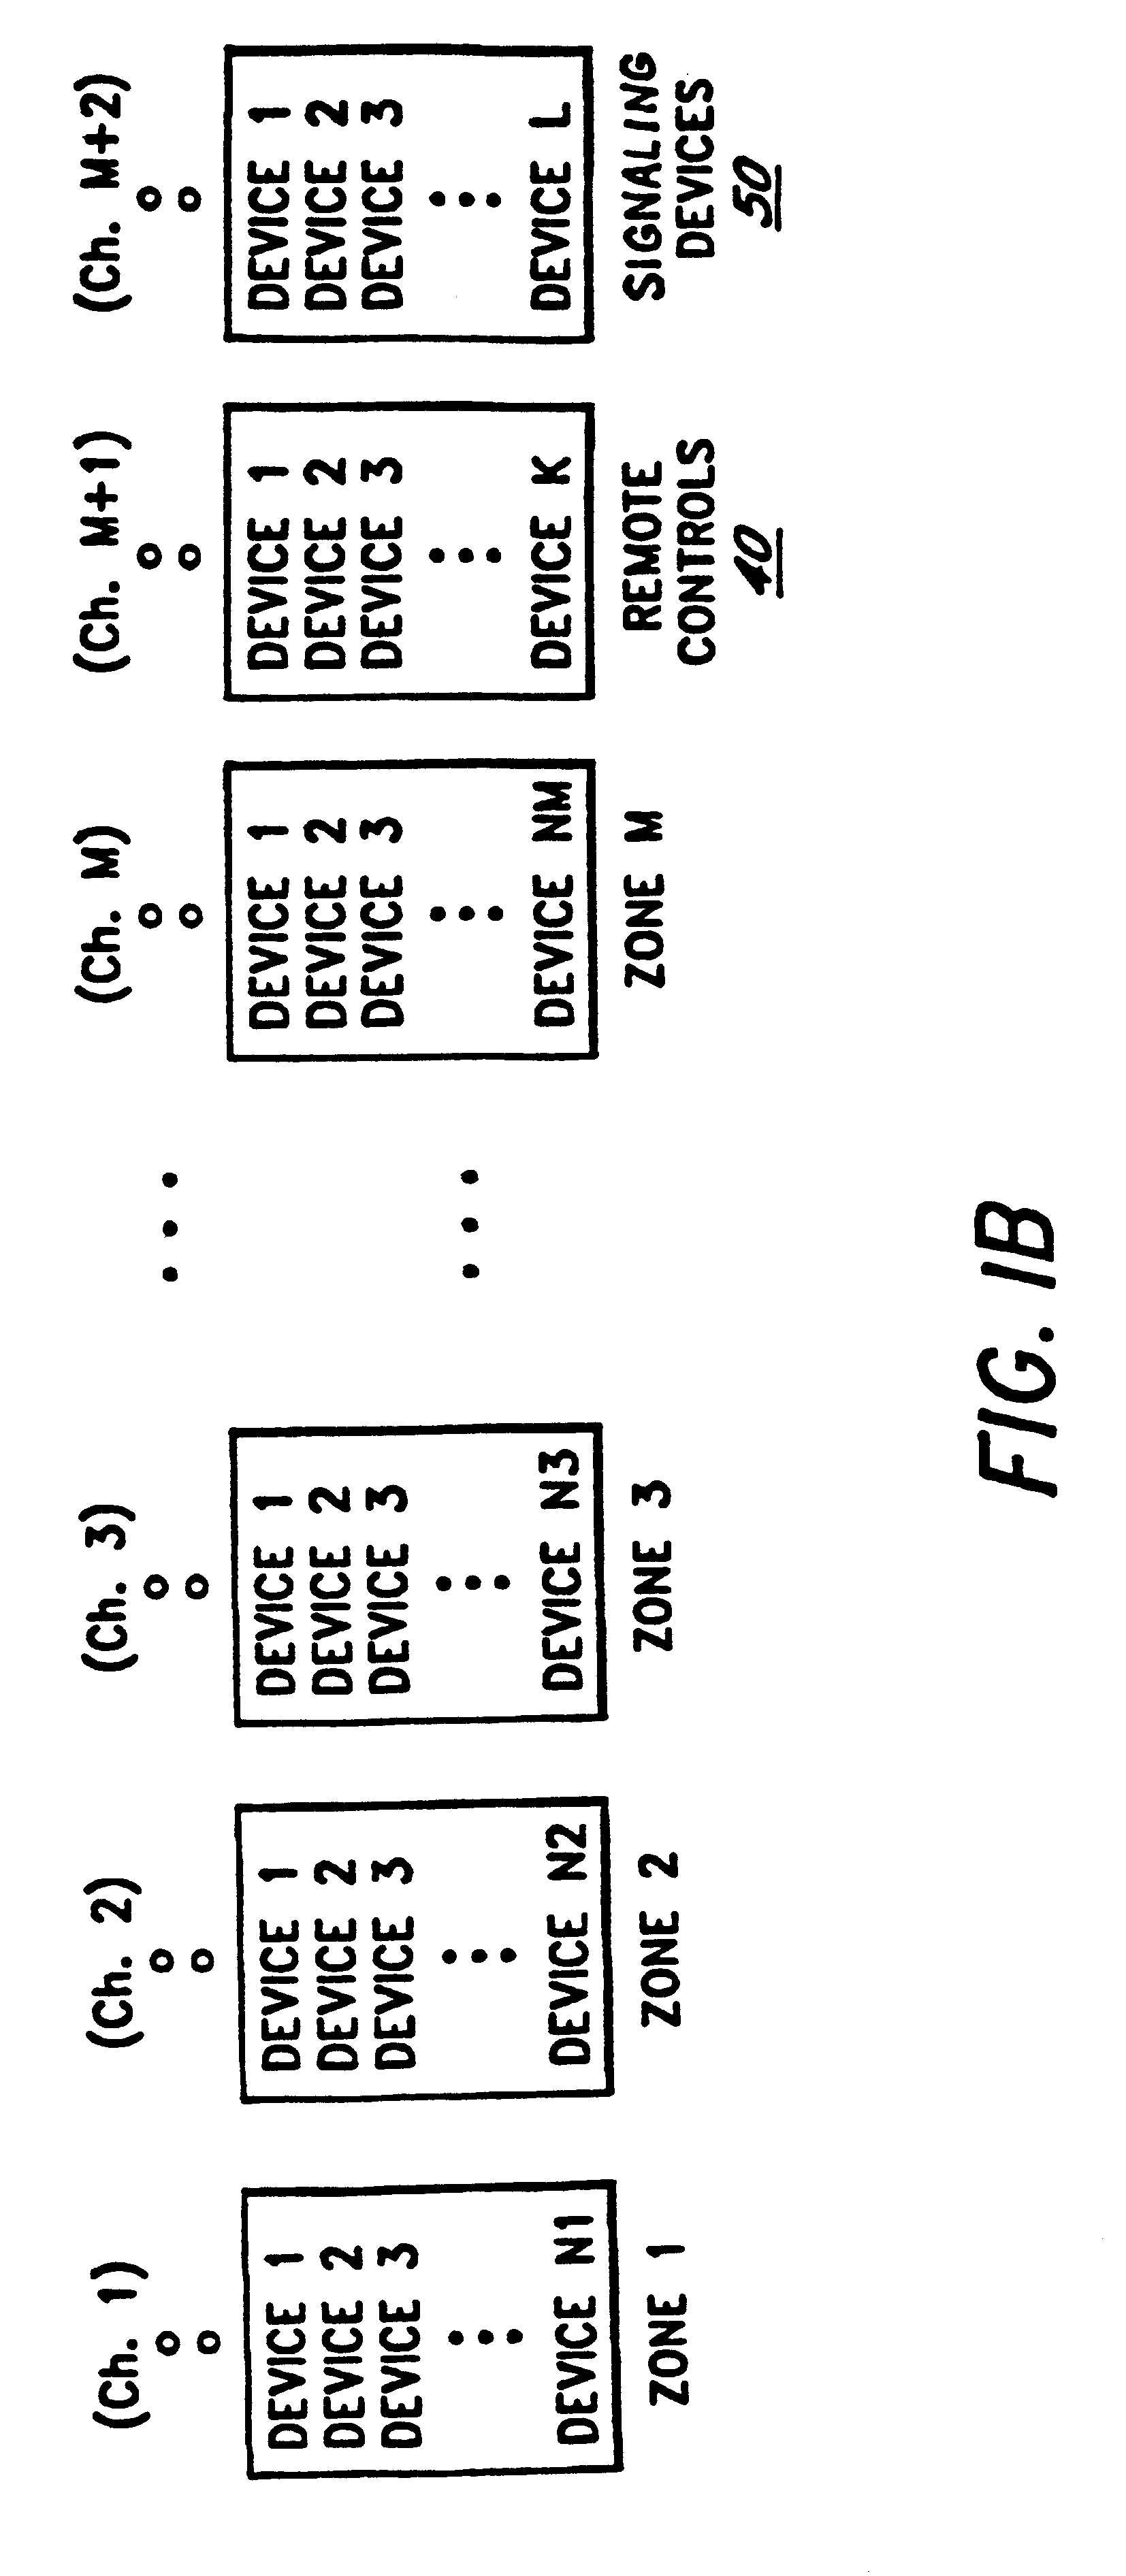 Remote signaling device for a rolling code security system